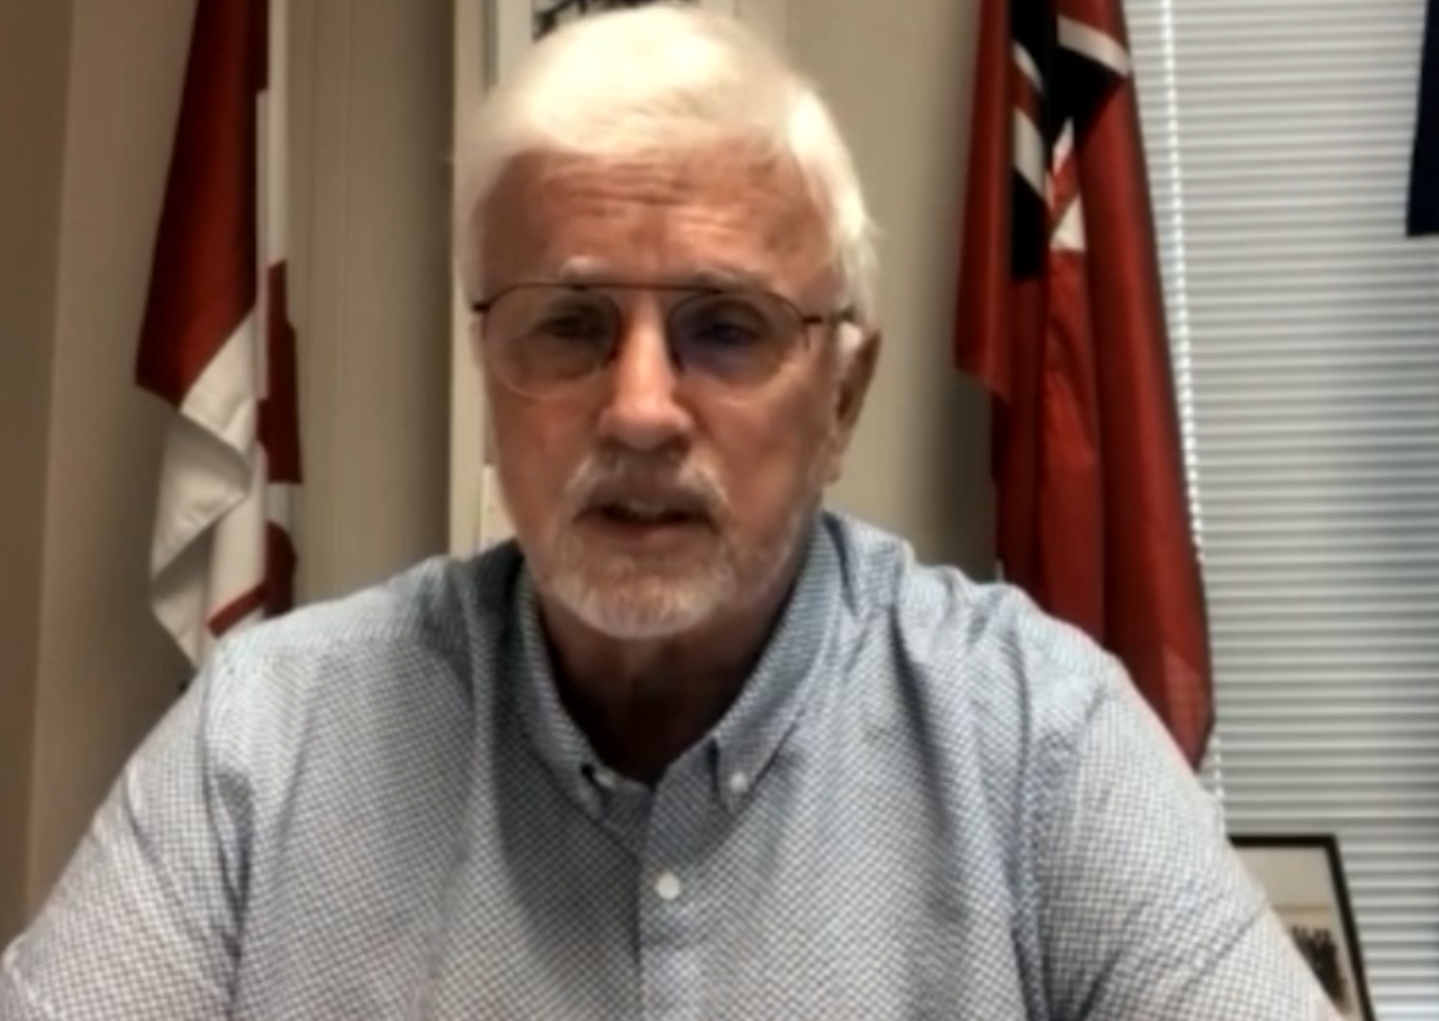 MPP shares vaccine misinformation in interview after being turfed from PCs